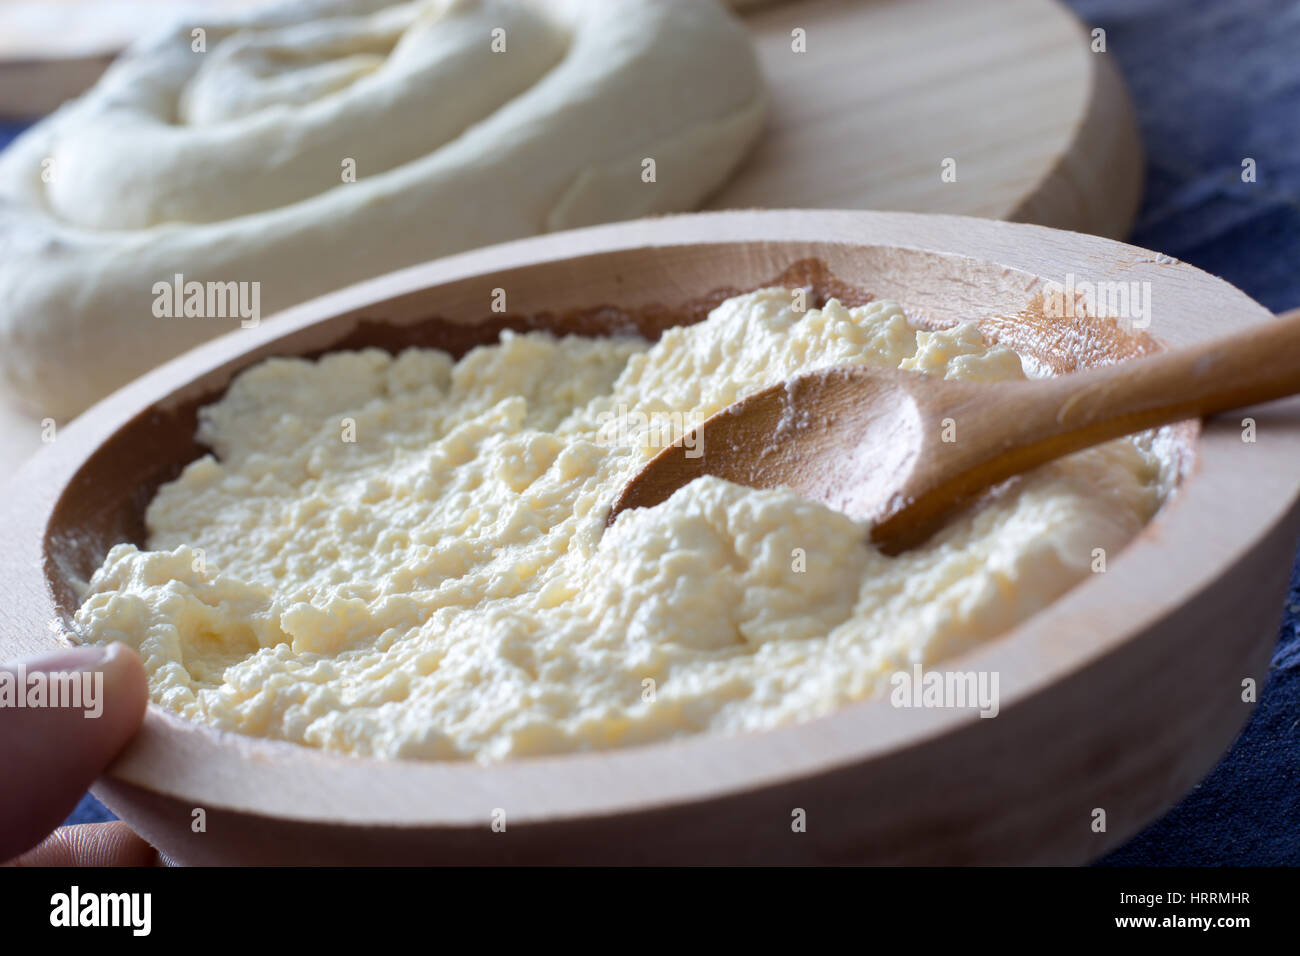 Molten cheese prepared for the cheese pie in the wooden bowl with spoon and female hand holding it. On the backround visible rolled cheese pie ready f Stock Photo